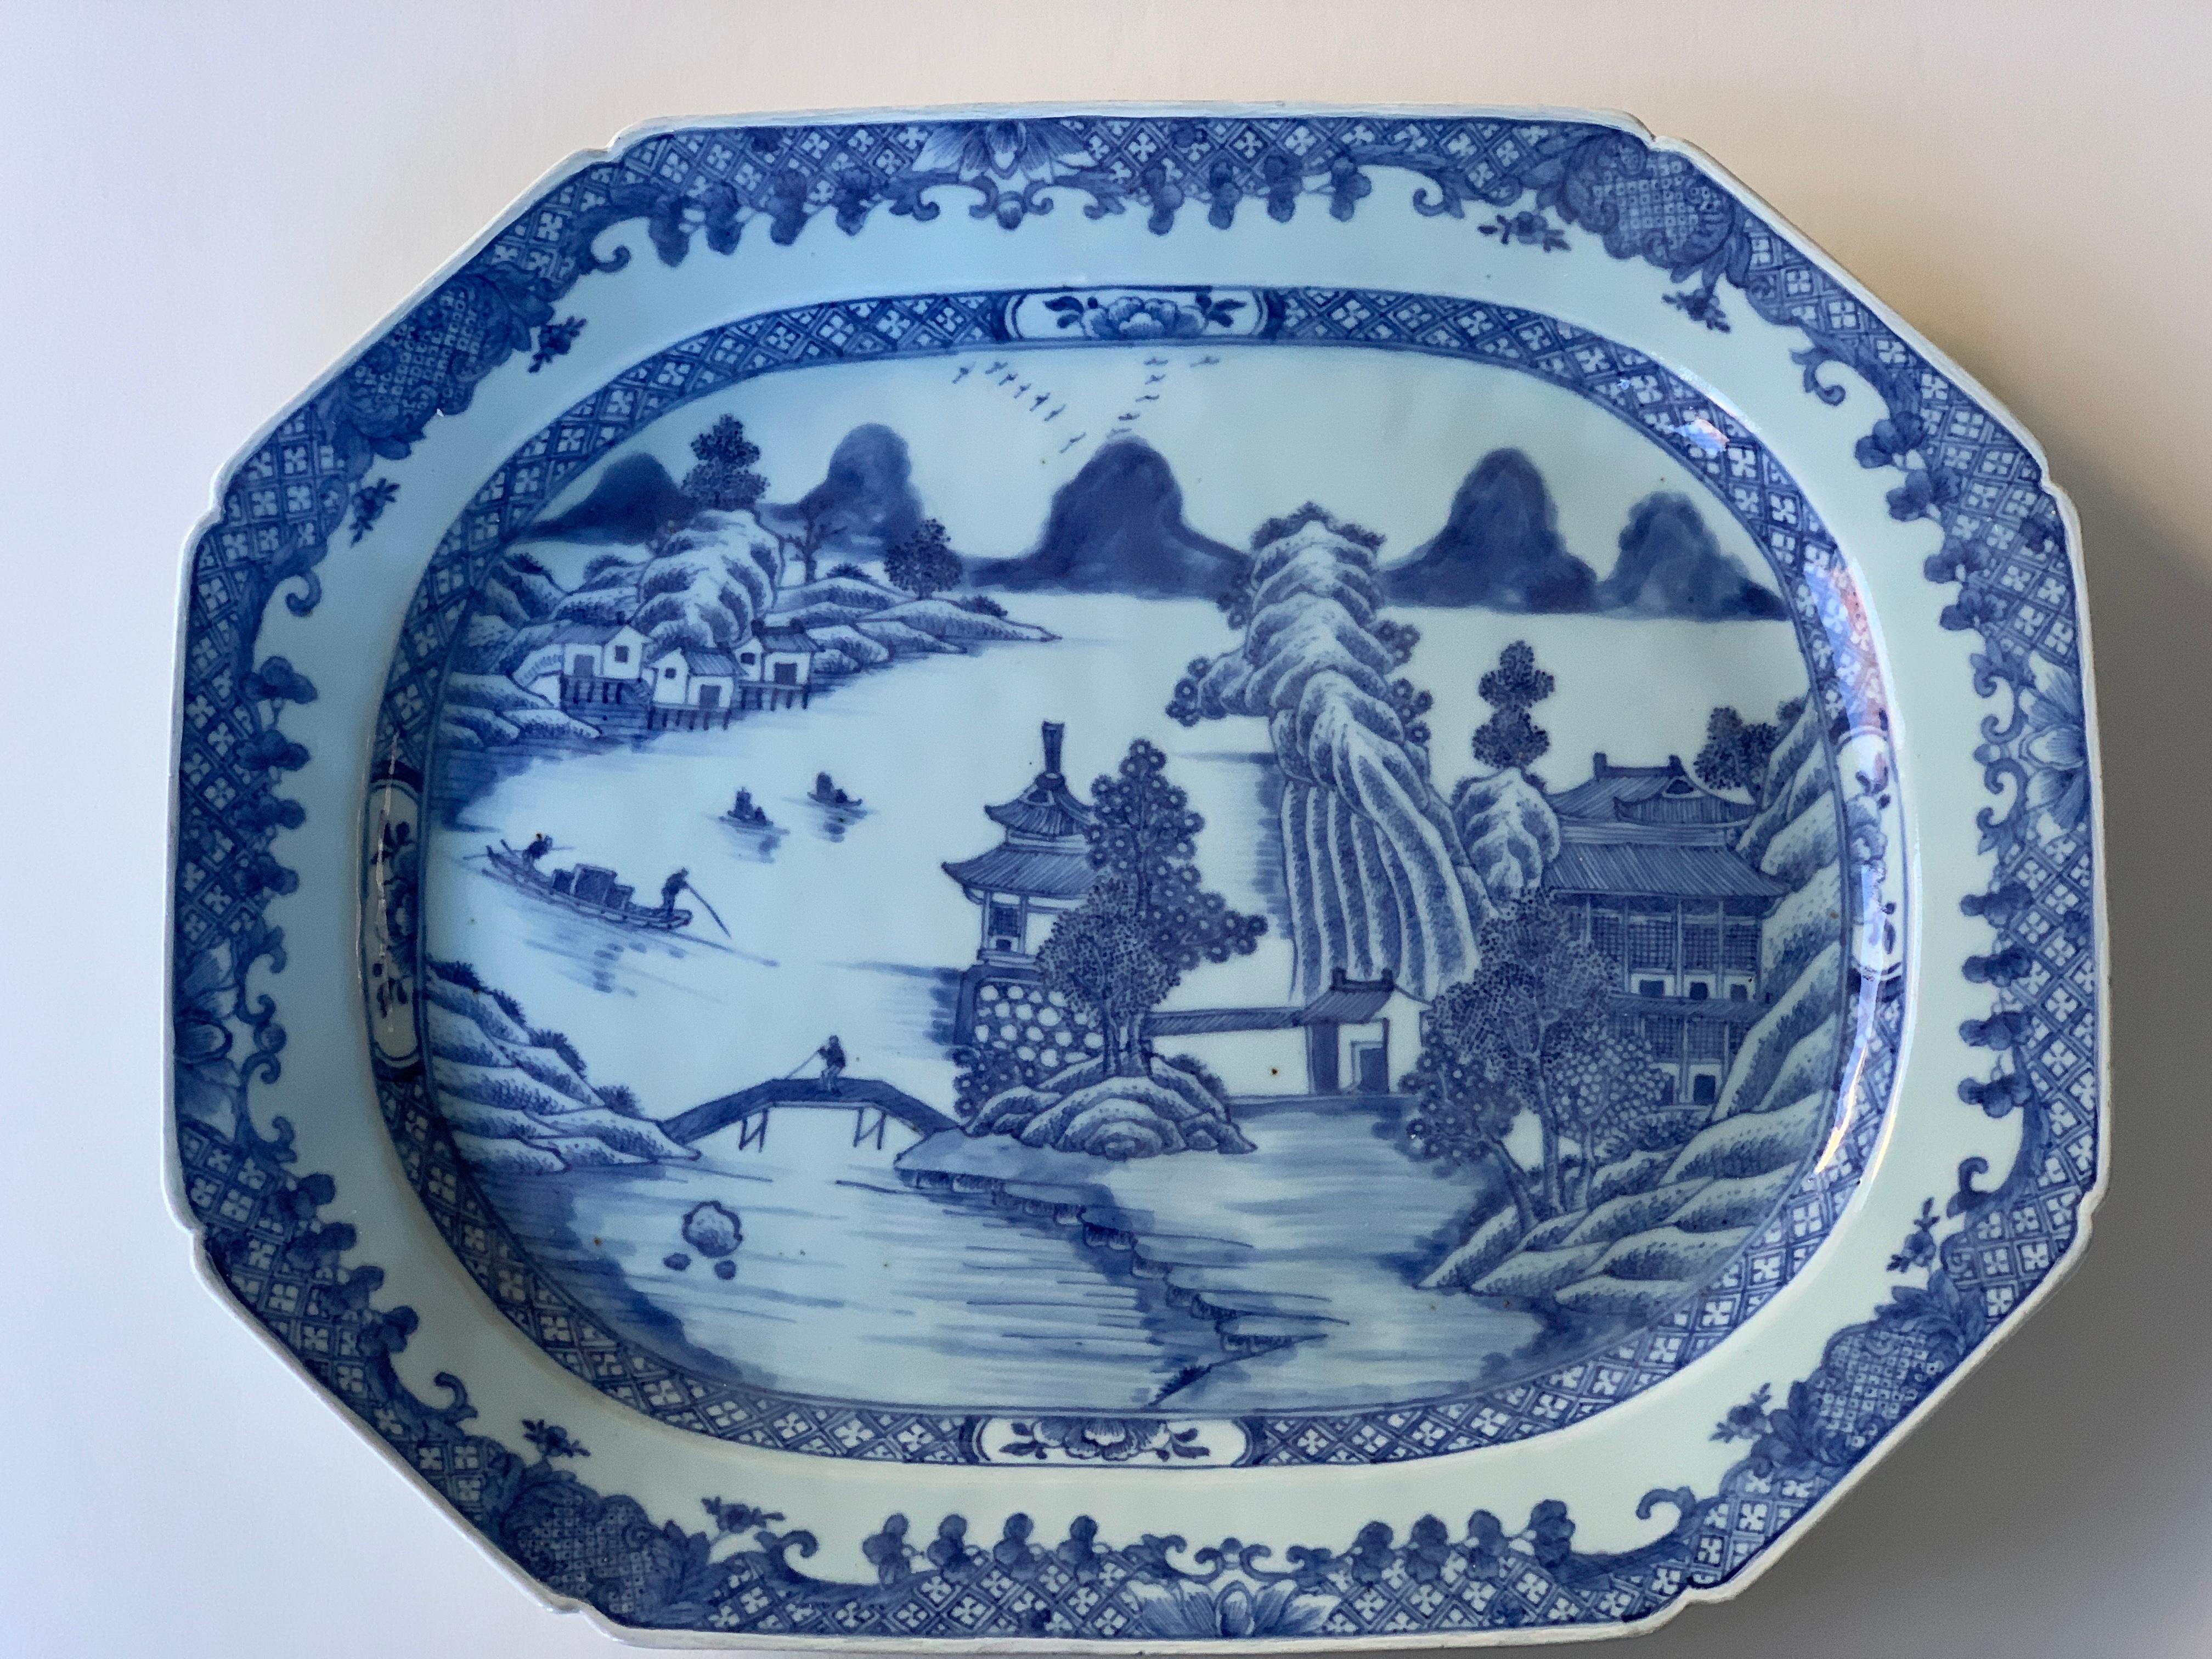 This large hand-painted blue and white Chinese porcelain platter was made in the 18th century, Qianlong period, circa 1780. 
The scene shows a harbor with flower-filled trees, pagodas, rockwork, and distant mountains. Small details add to the